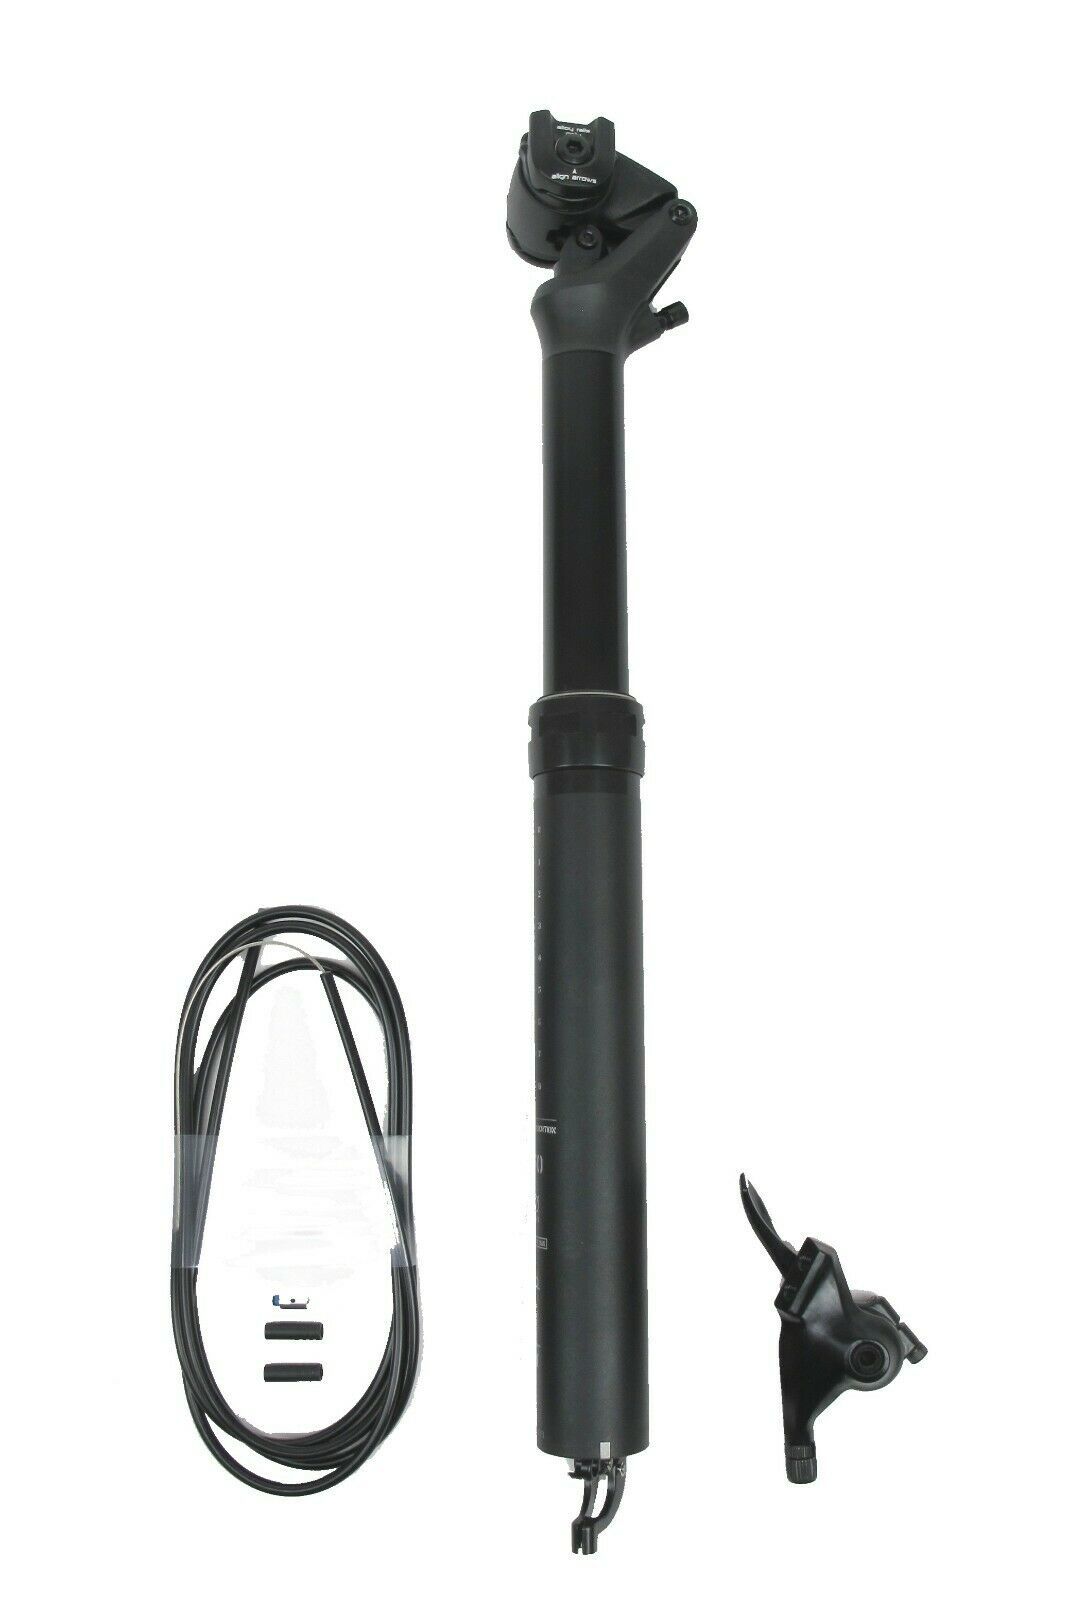 Specialized Command Post WU - 34.9 150mm Internal Remote - $350 MSRP